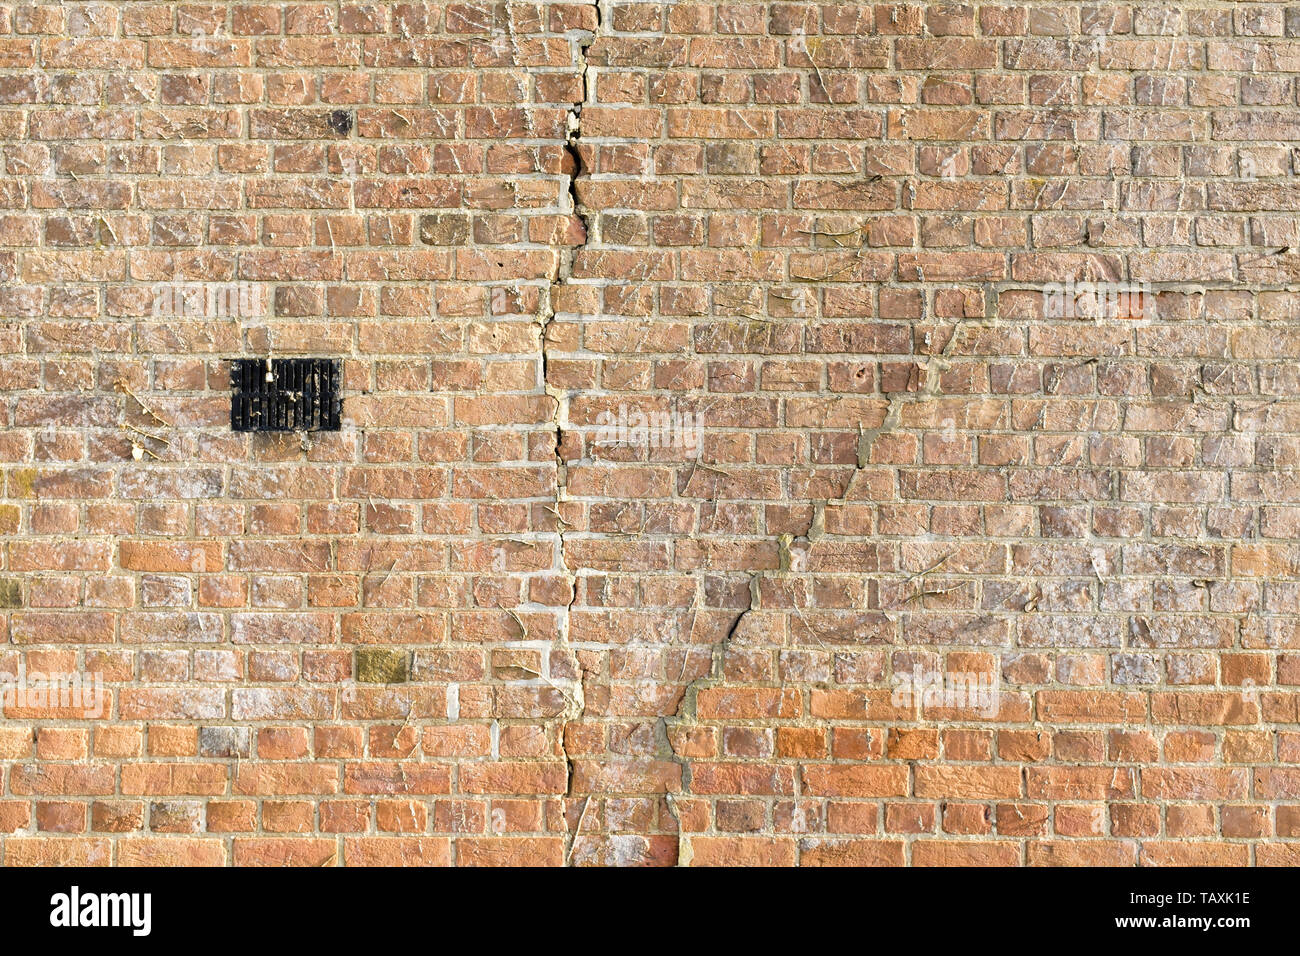 Large cracks in a brick wall due to subsidence Stock Photo